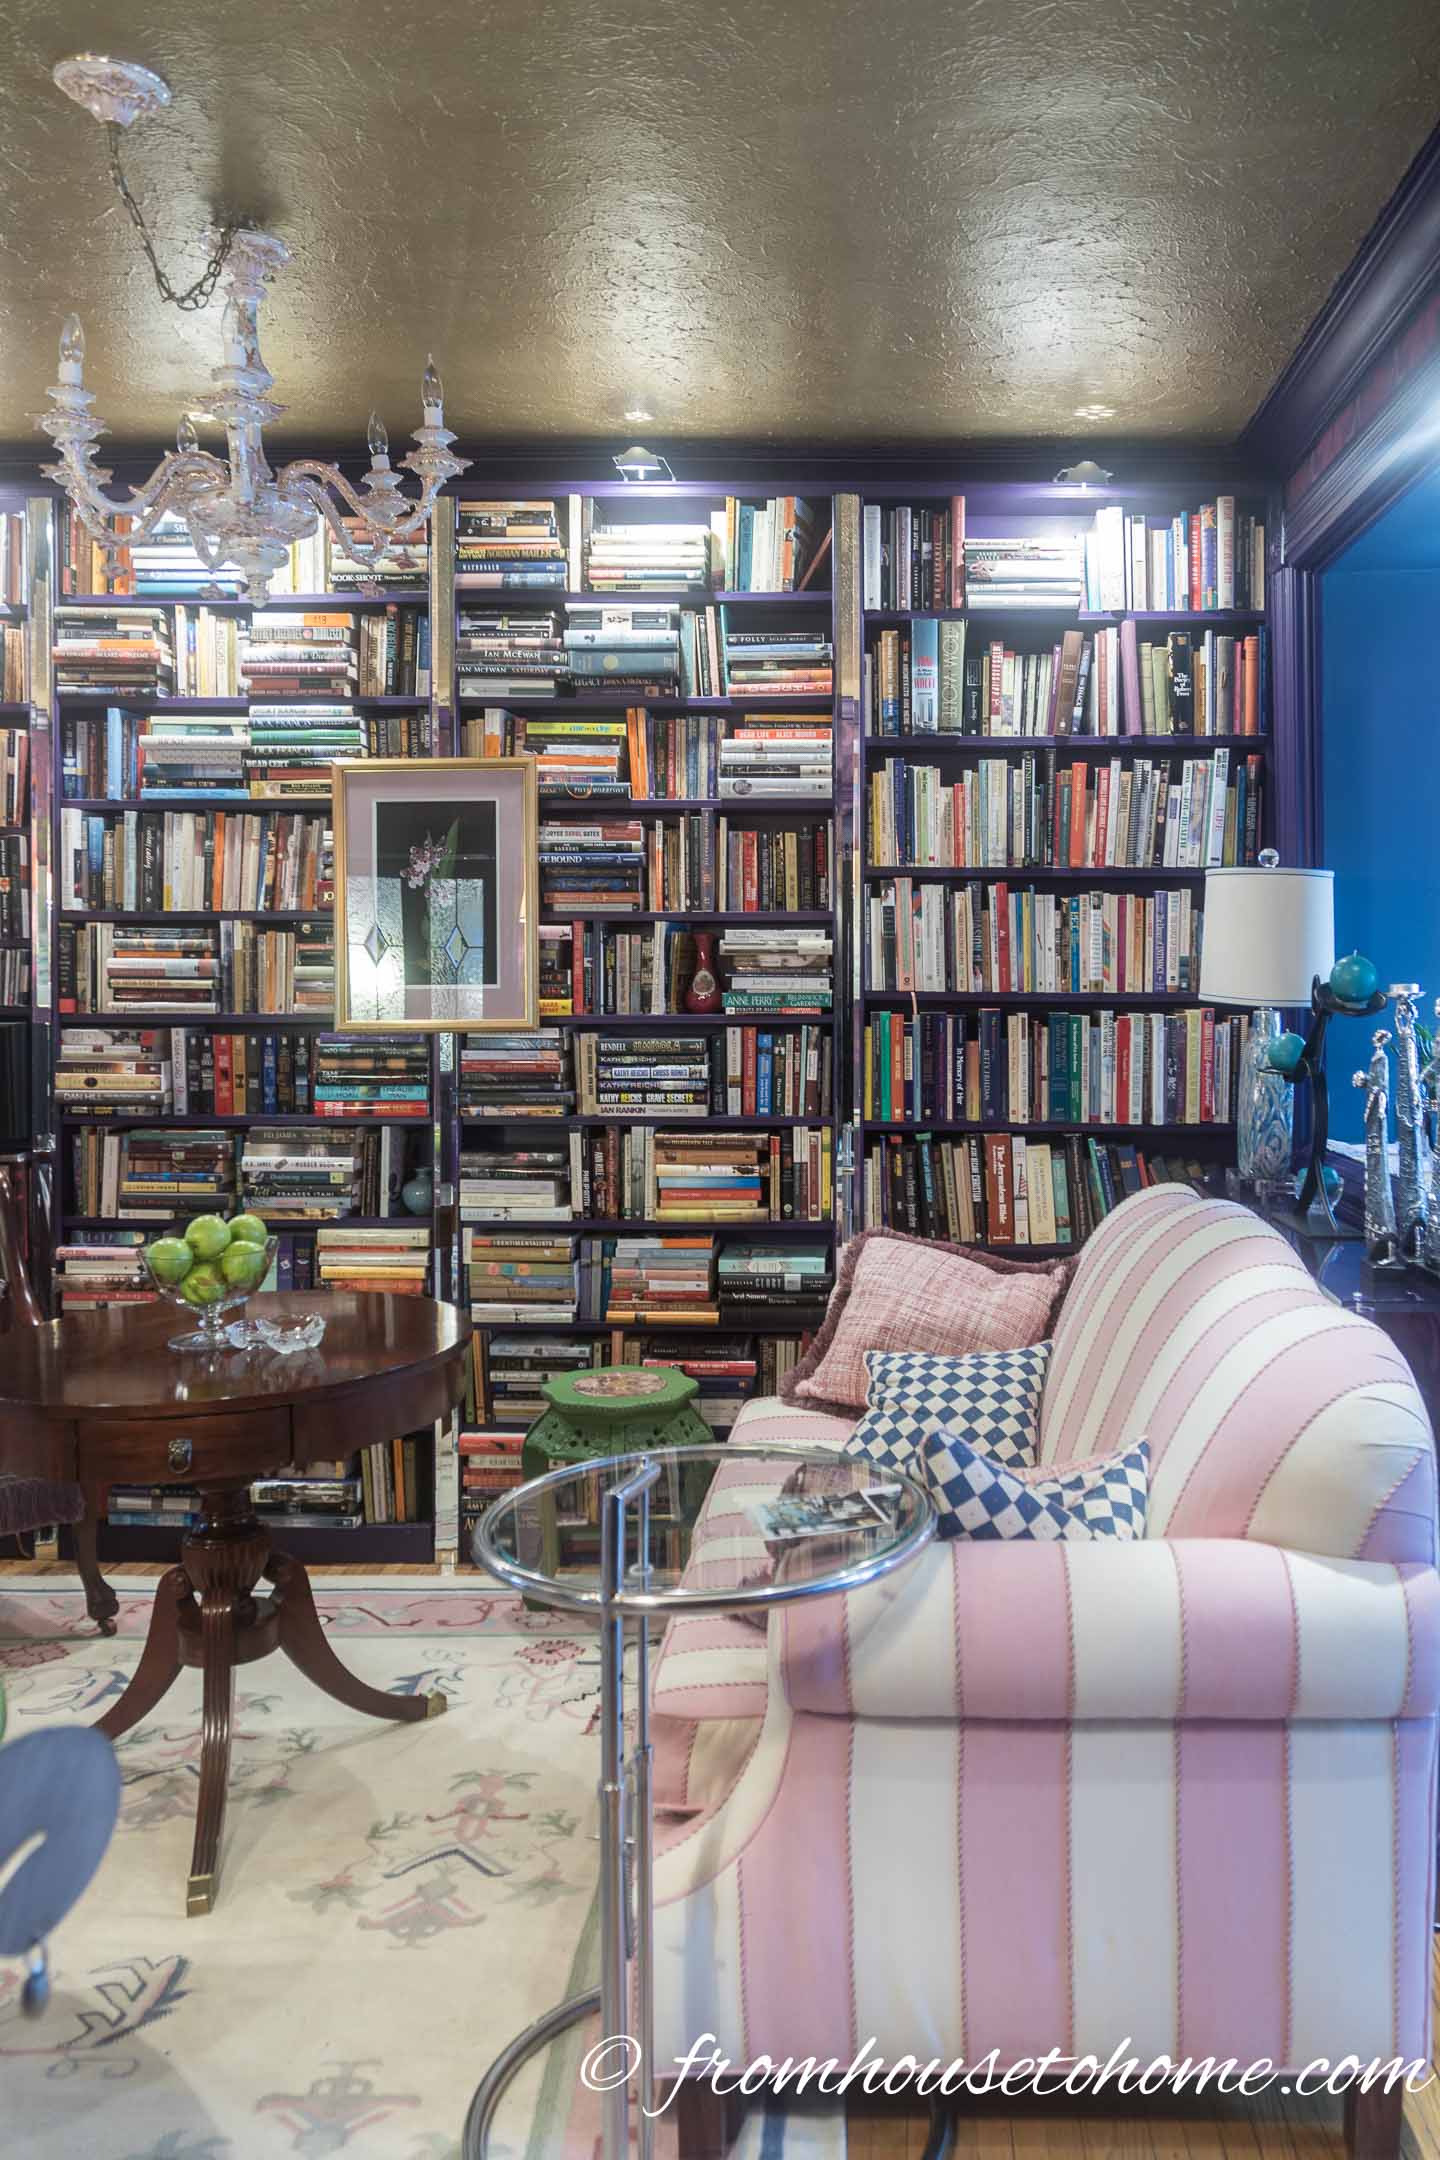 Wall of bookshelves in a living room